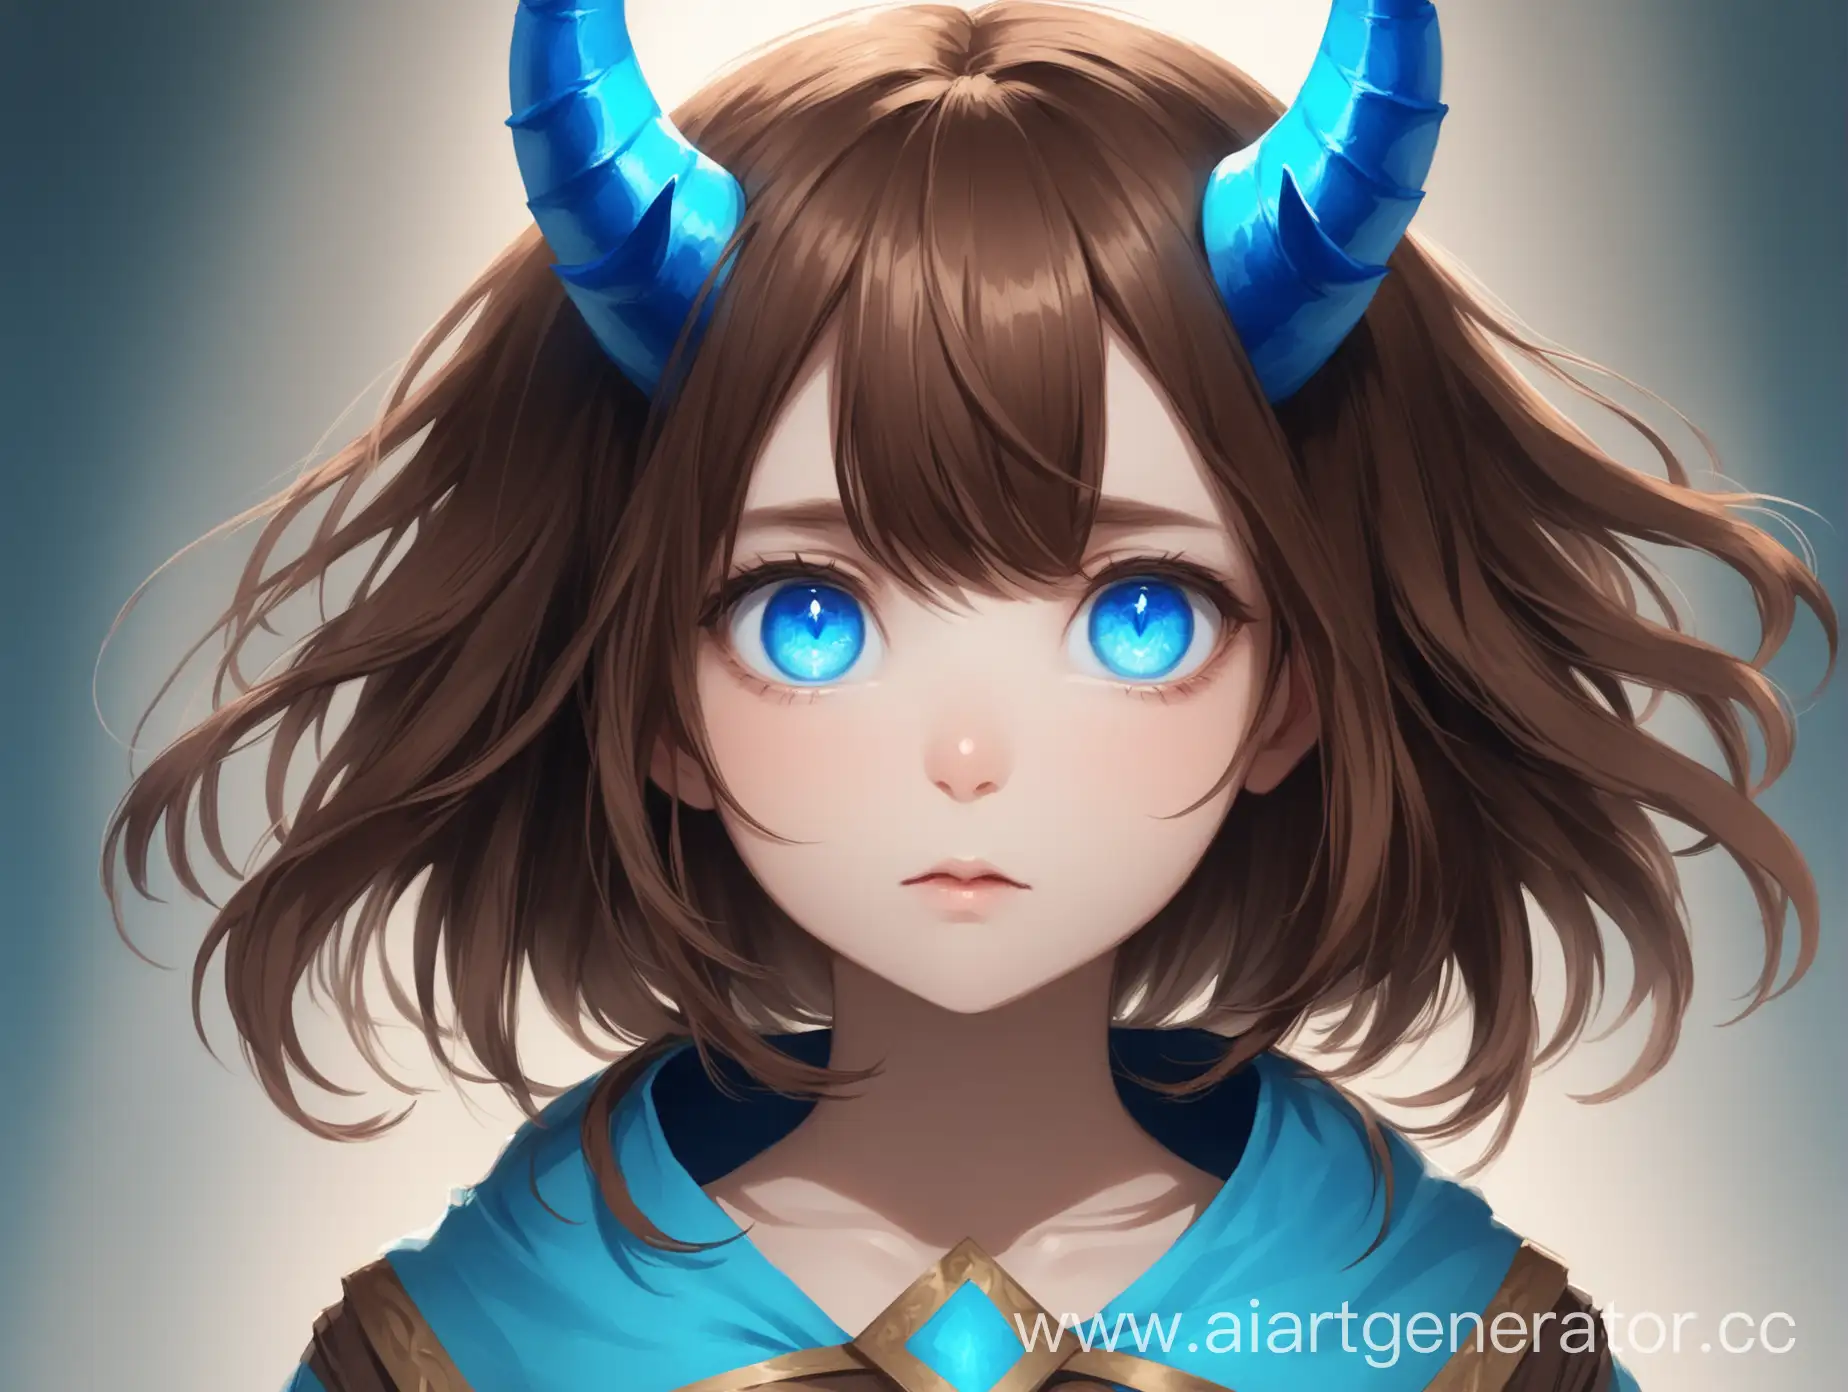 Enigmatic-Girl-with-Brown-Hair-Blue-Horns-and-Piercing-Blue-Eyes